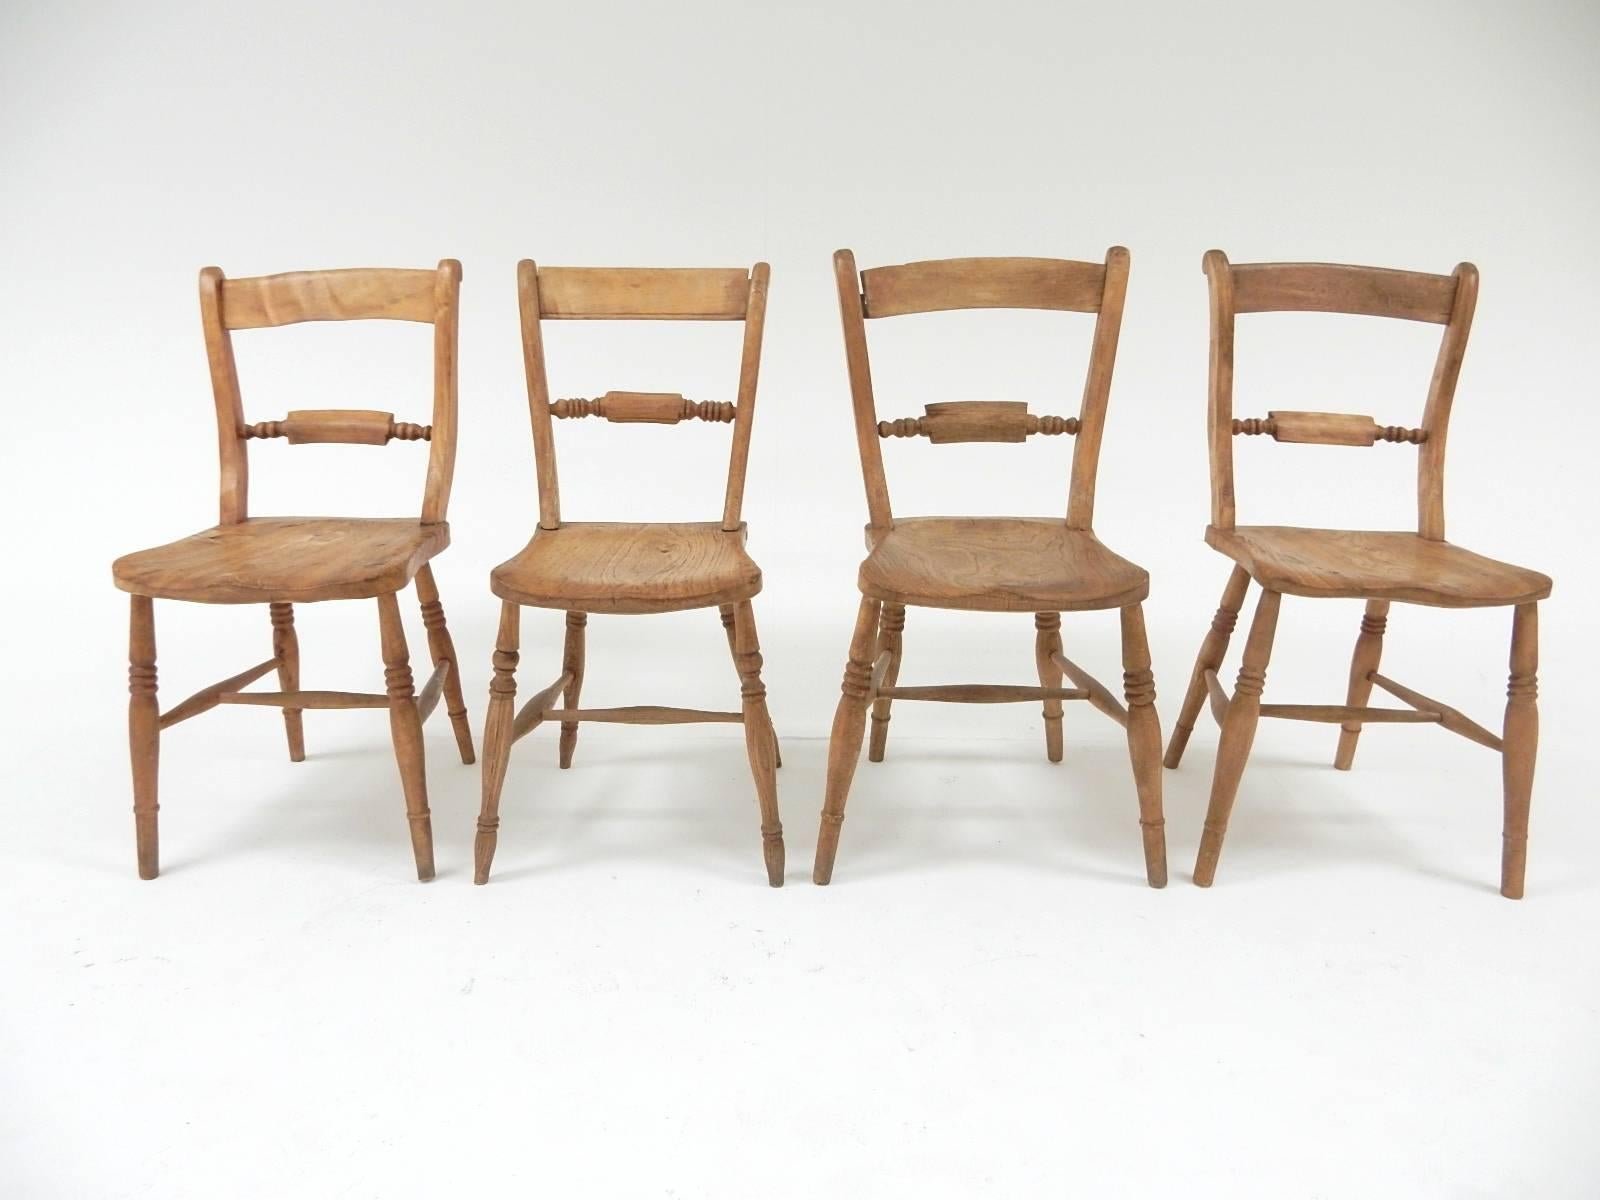 queen victoria chairs